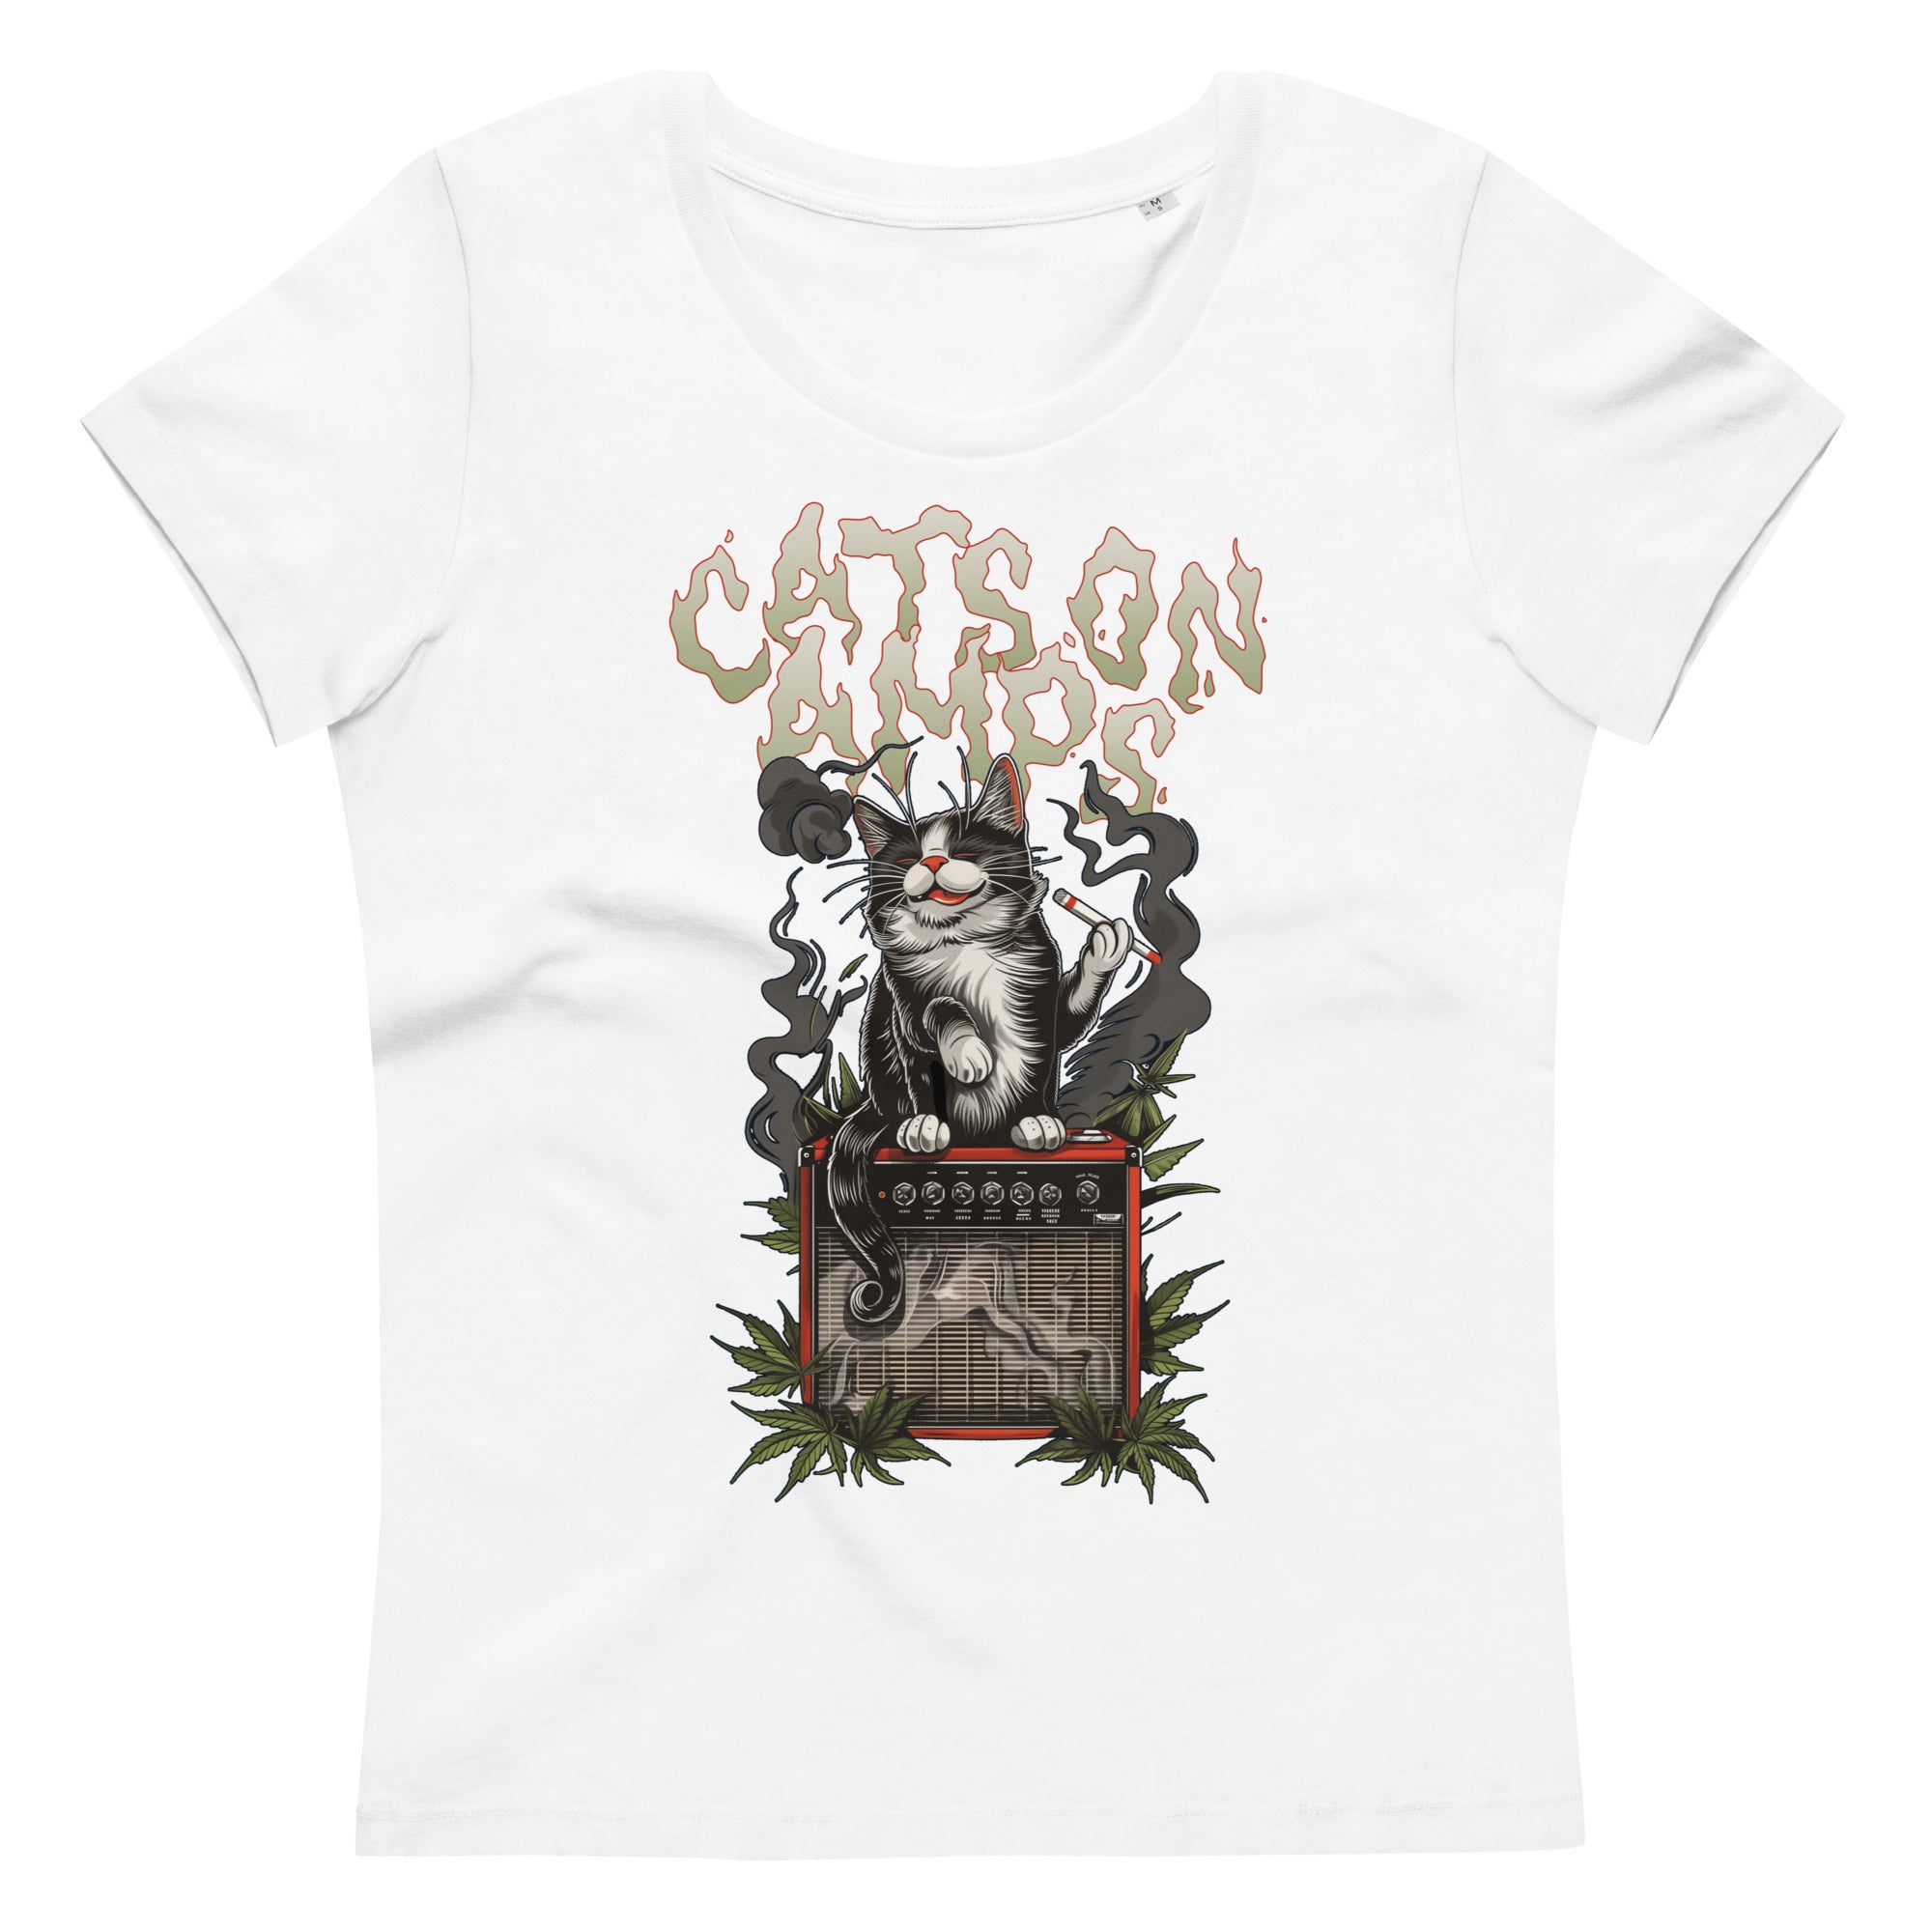 CATS ON AMPS - 420 relishing Cat - Women's fitted eco tee